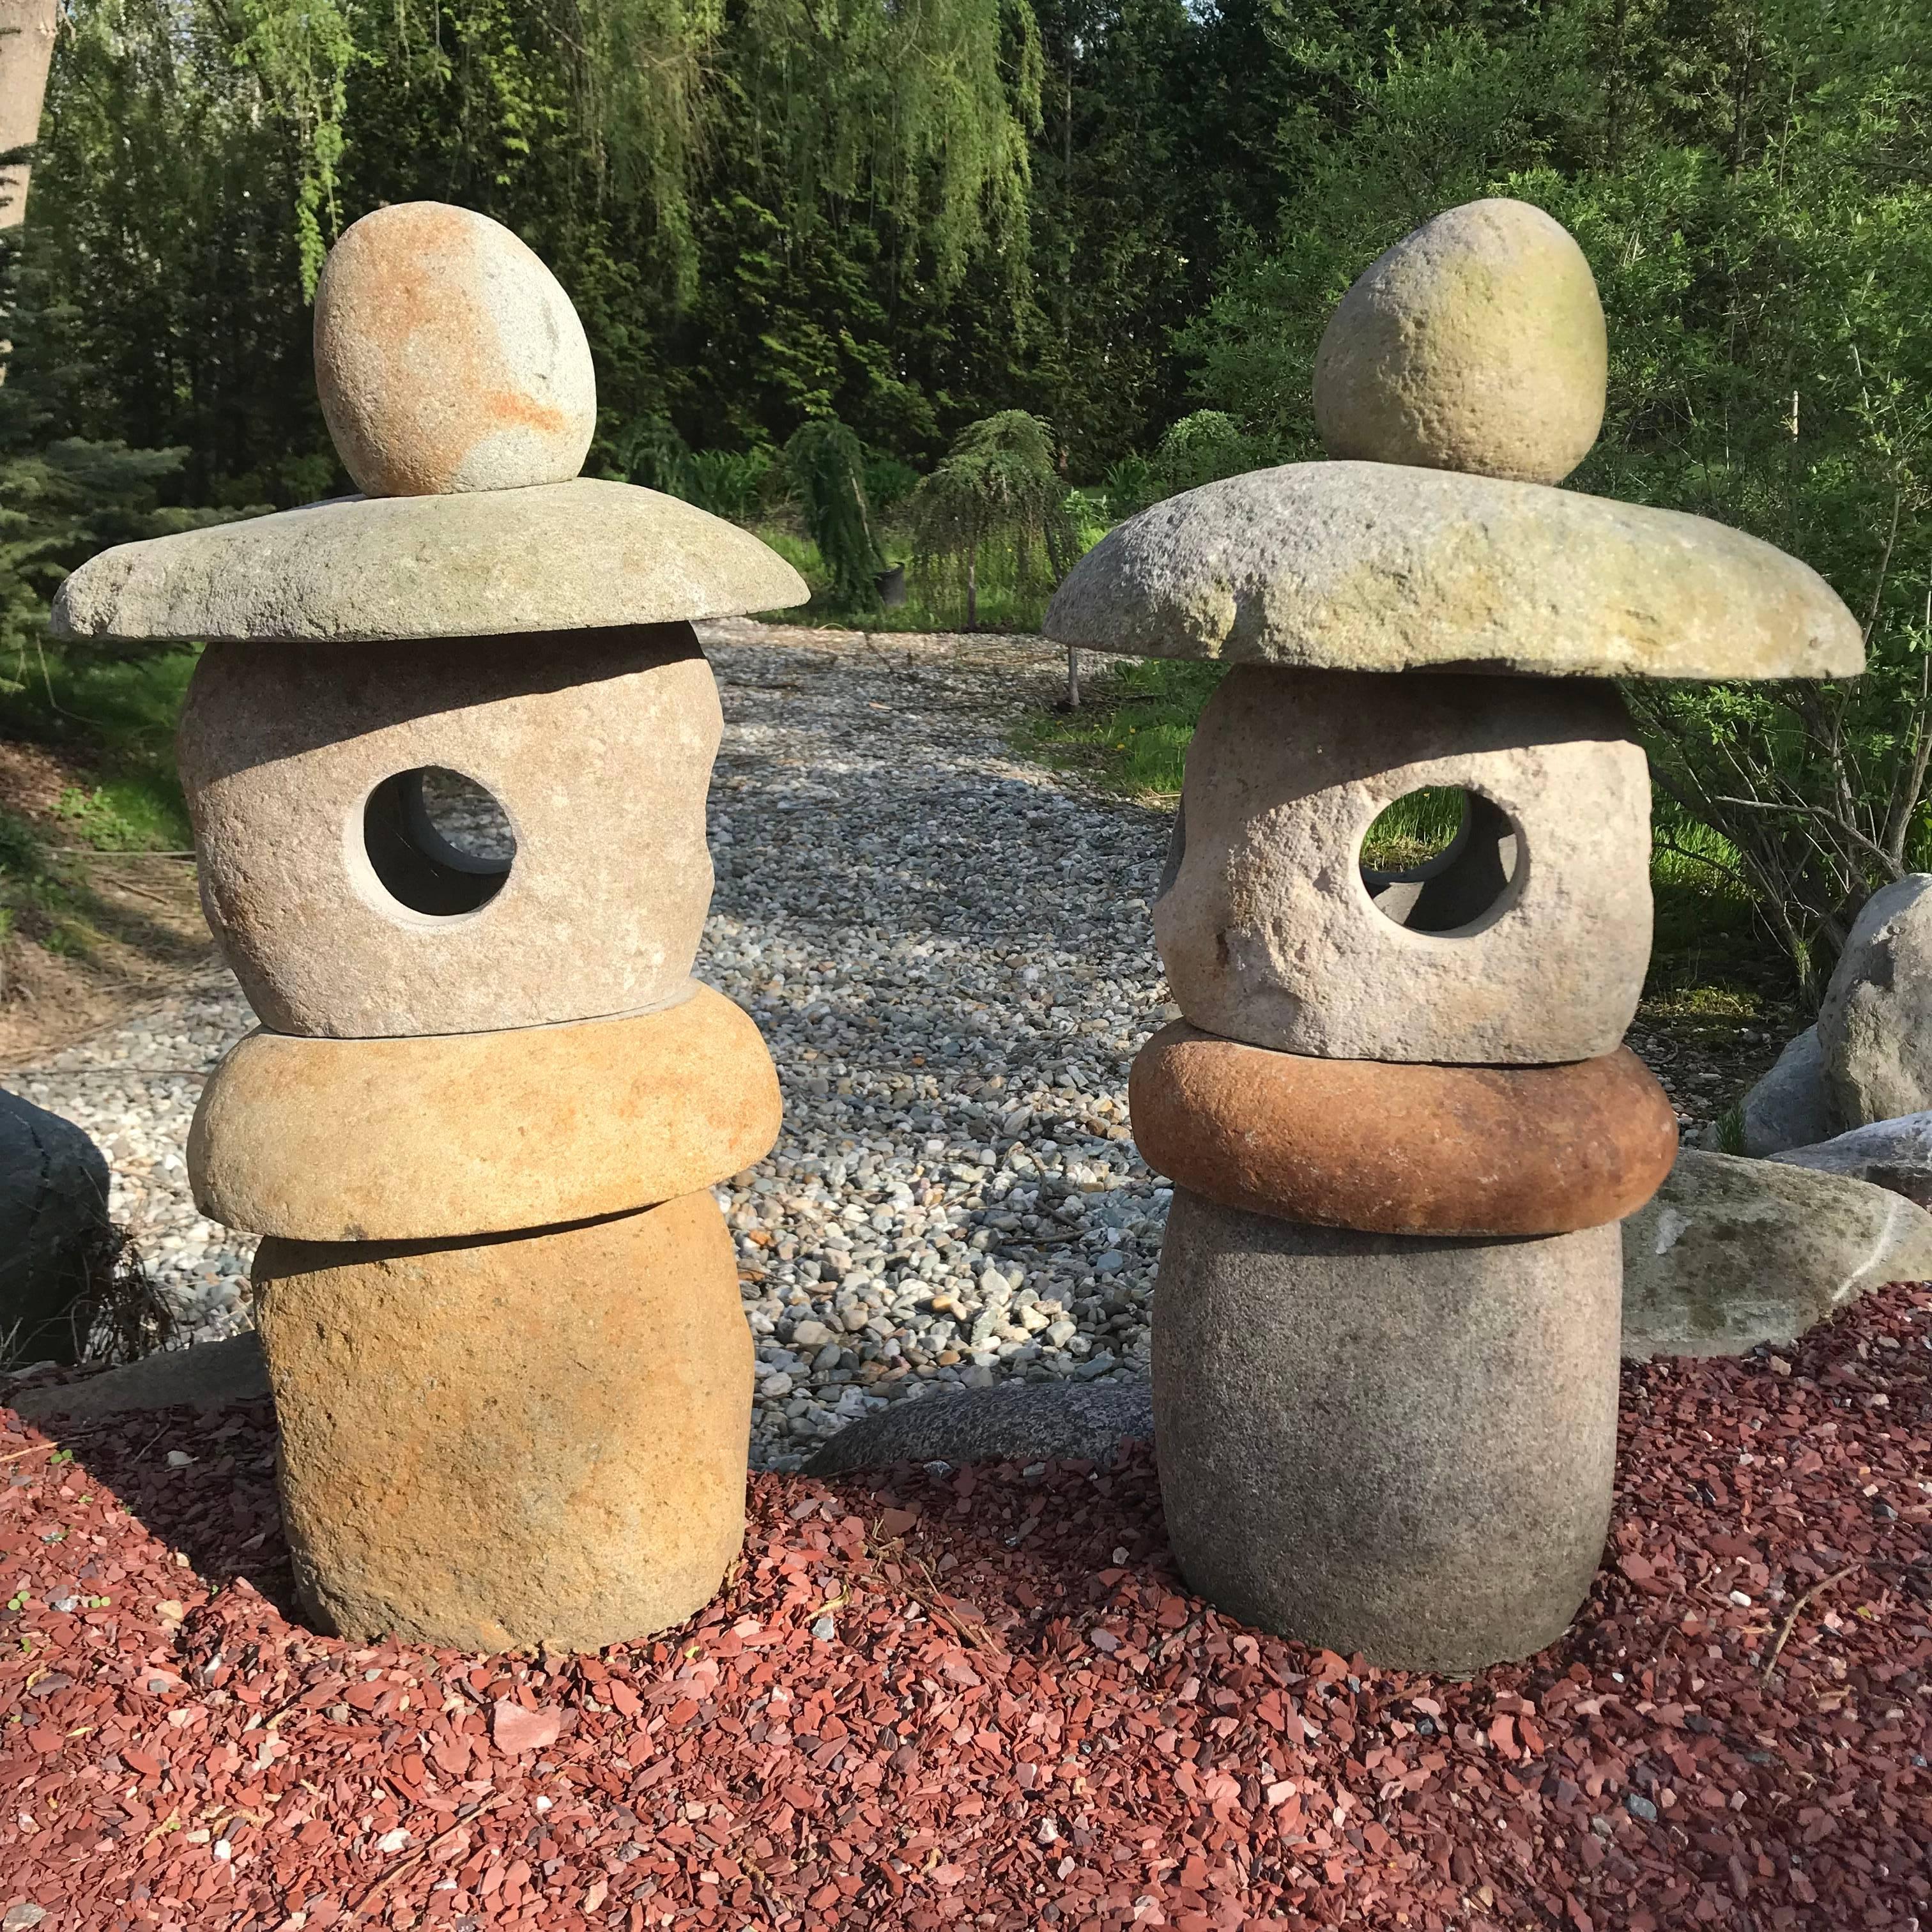 Here's an unusual opportunity to acquire a pair (2) of very nice sized stone -Spirit- lanterns carved from natural boulders and ideally suited for a small to medium garden out of doors or inside in your favorite sun space. 

The striking and well